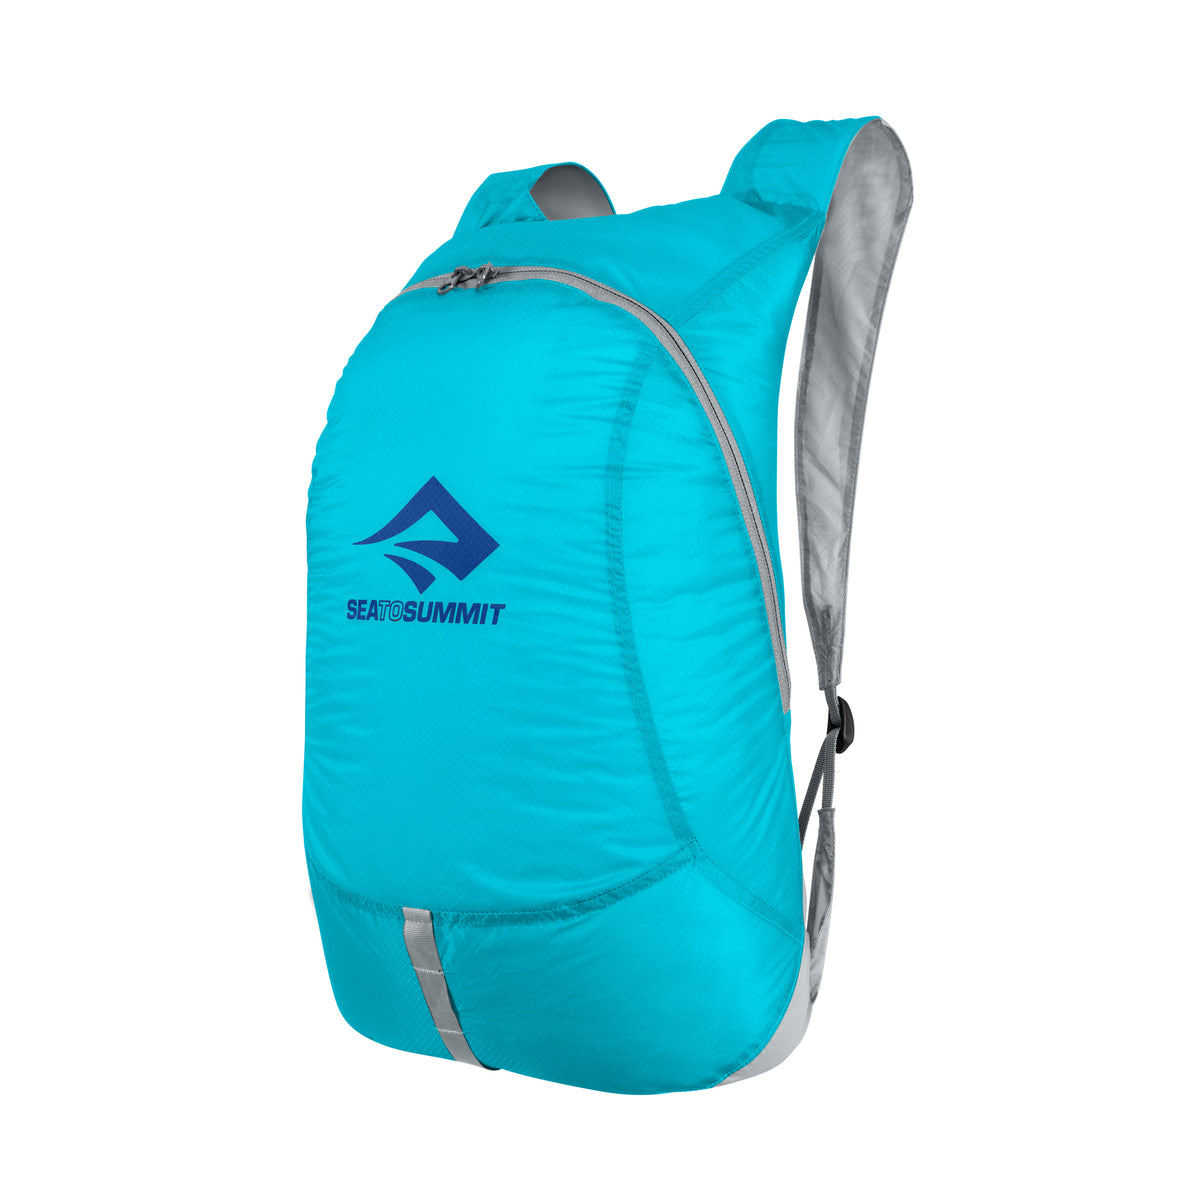 Daypacks: How to Choose